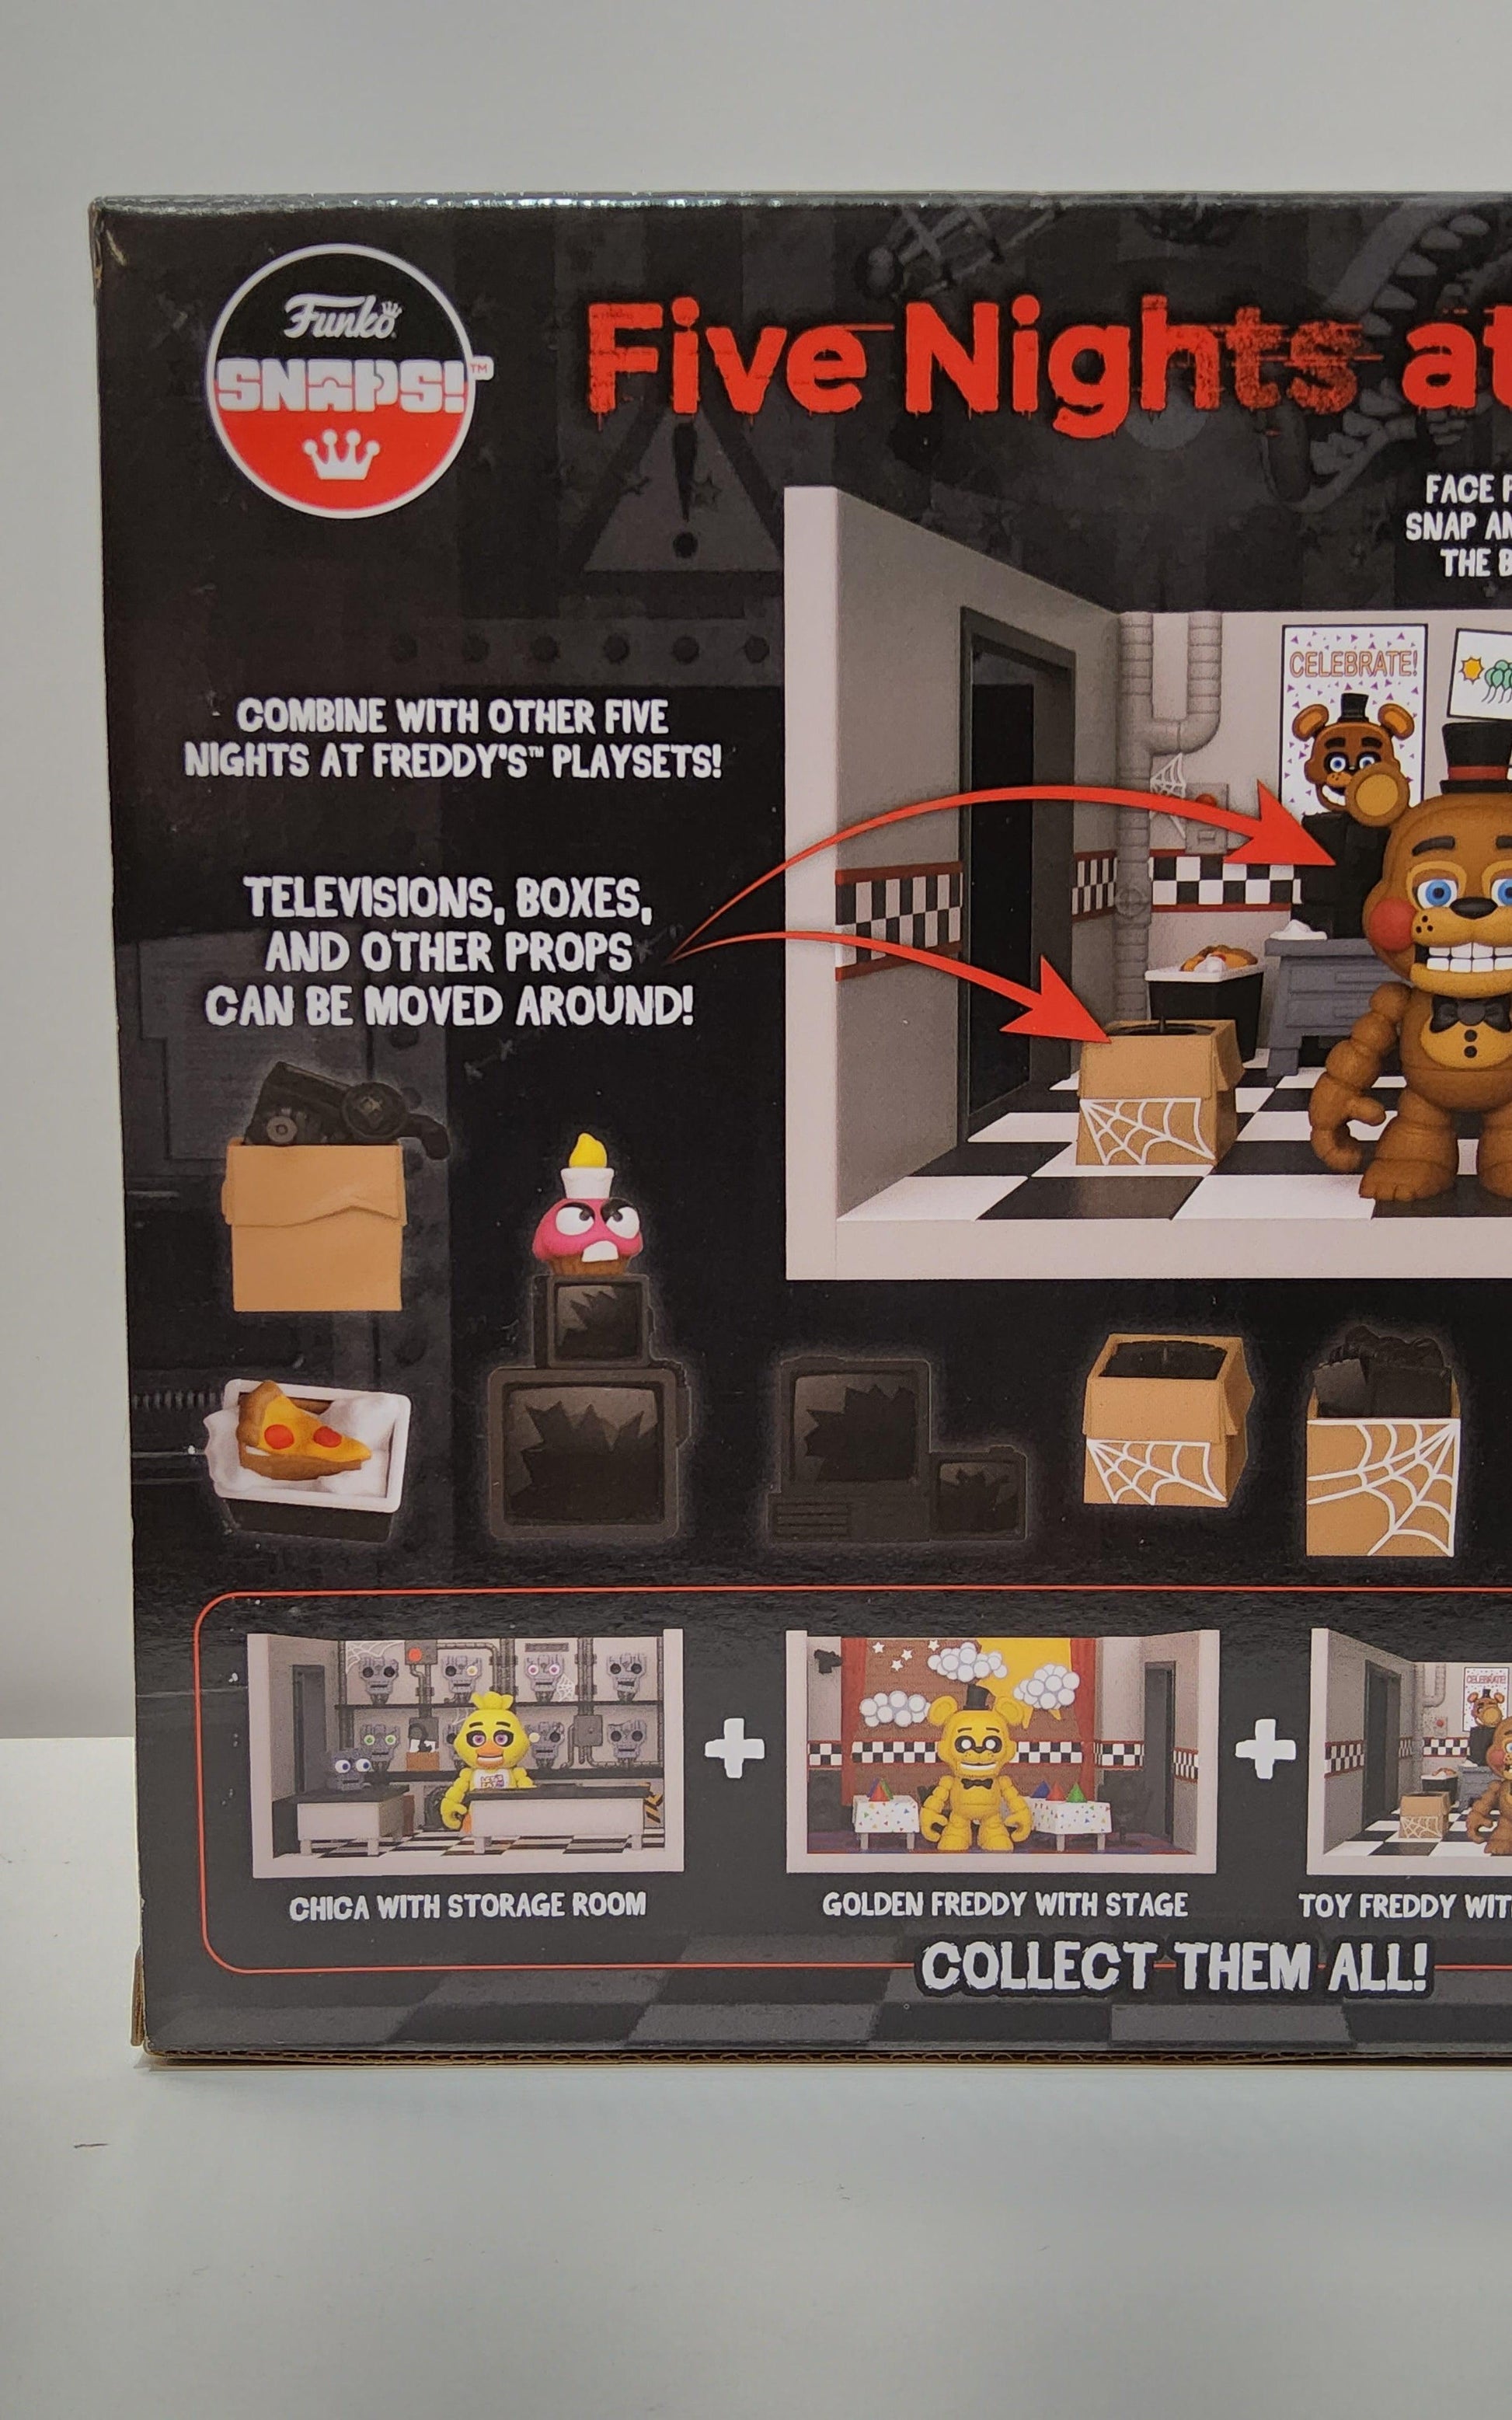 Funko FNAF Toy Freddy 3 Figure with Storage Room Playset - Collectibl –  Logan's Toy Chest